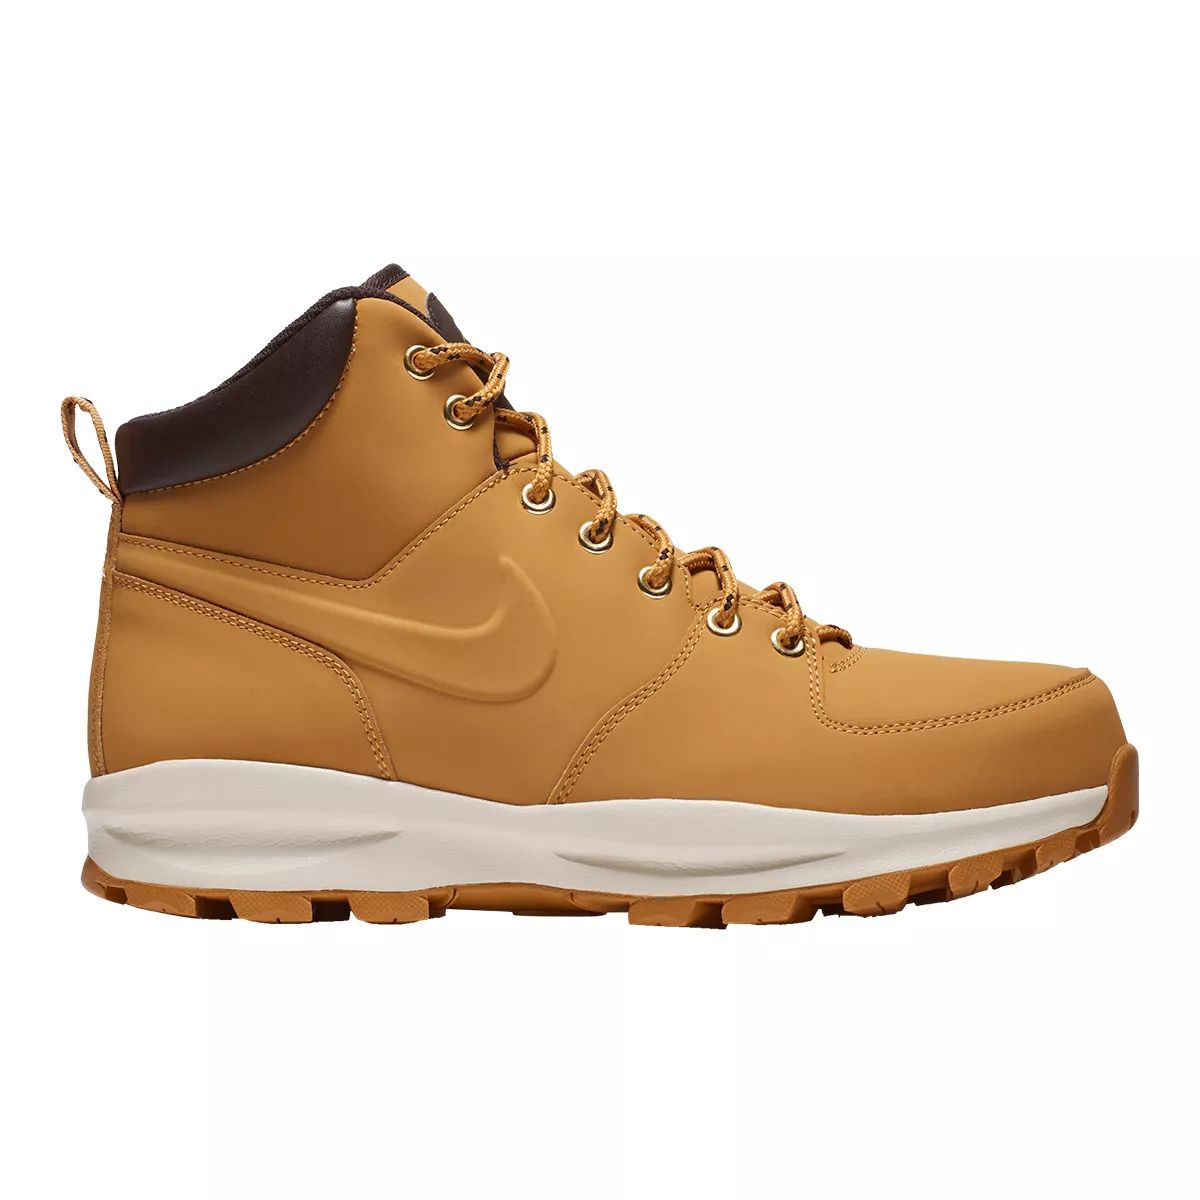 Nike Men's Manoa Boots  Leather Water Repellent Lightweight